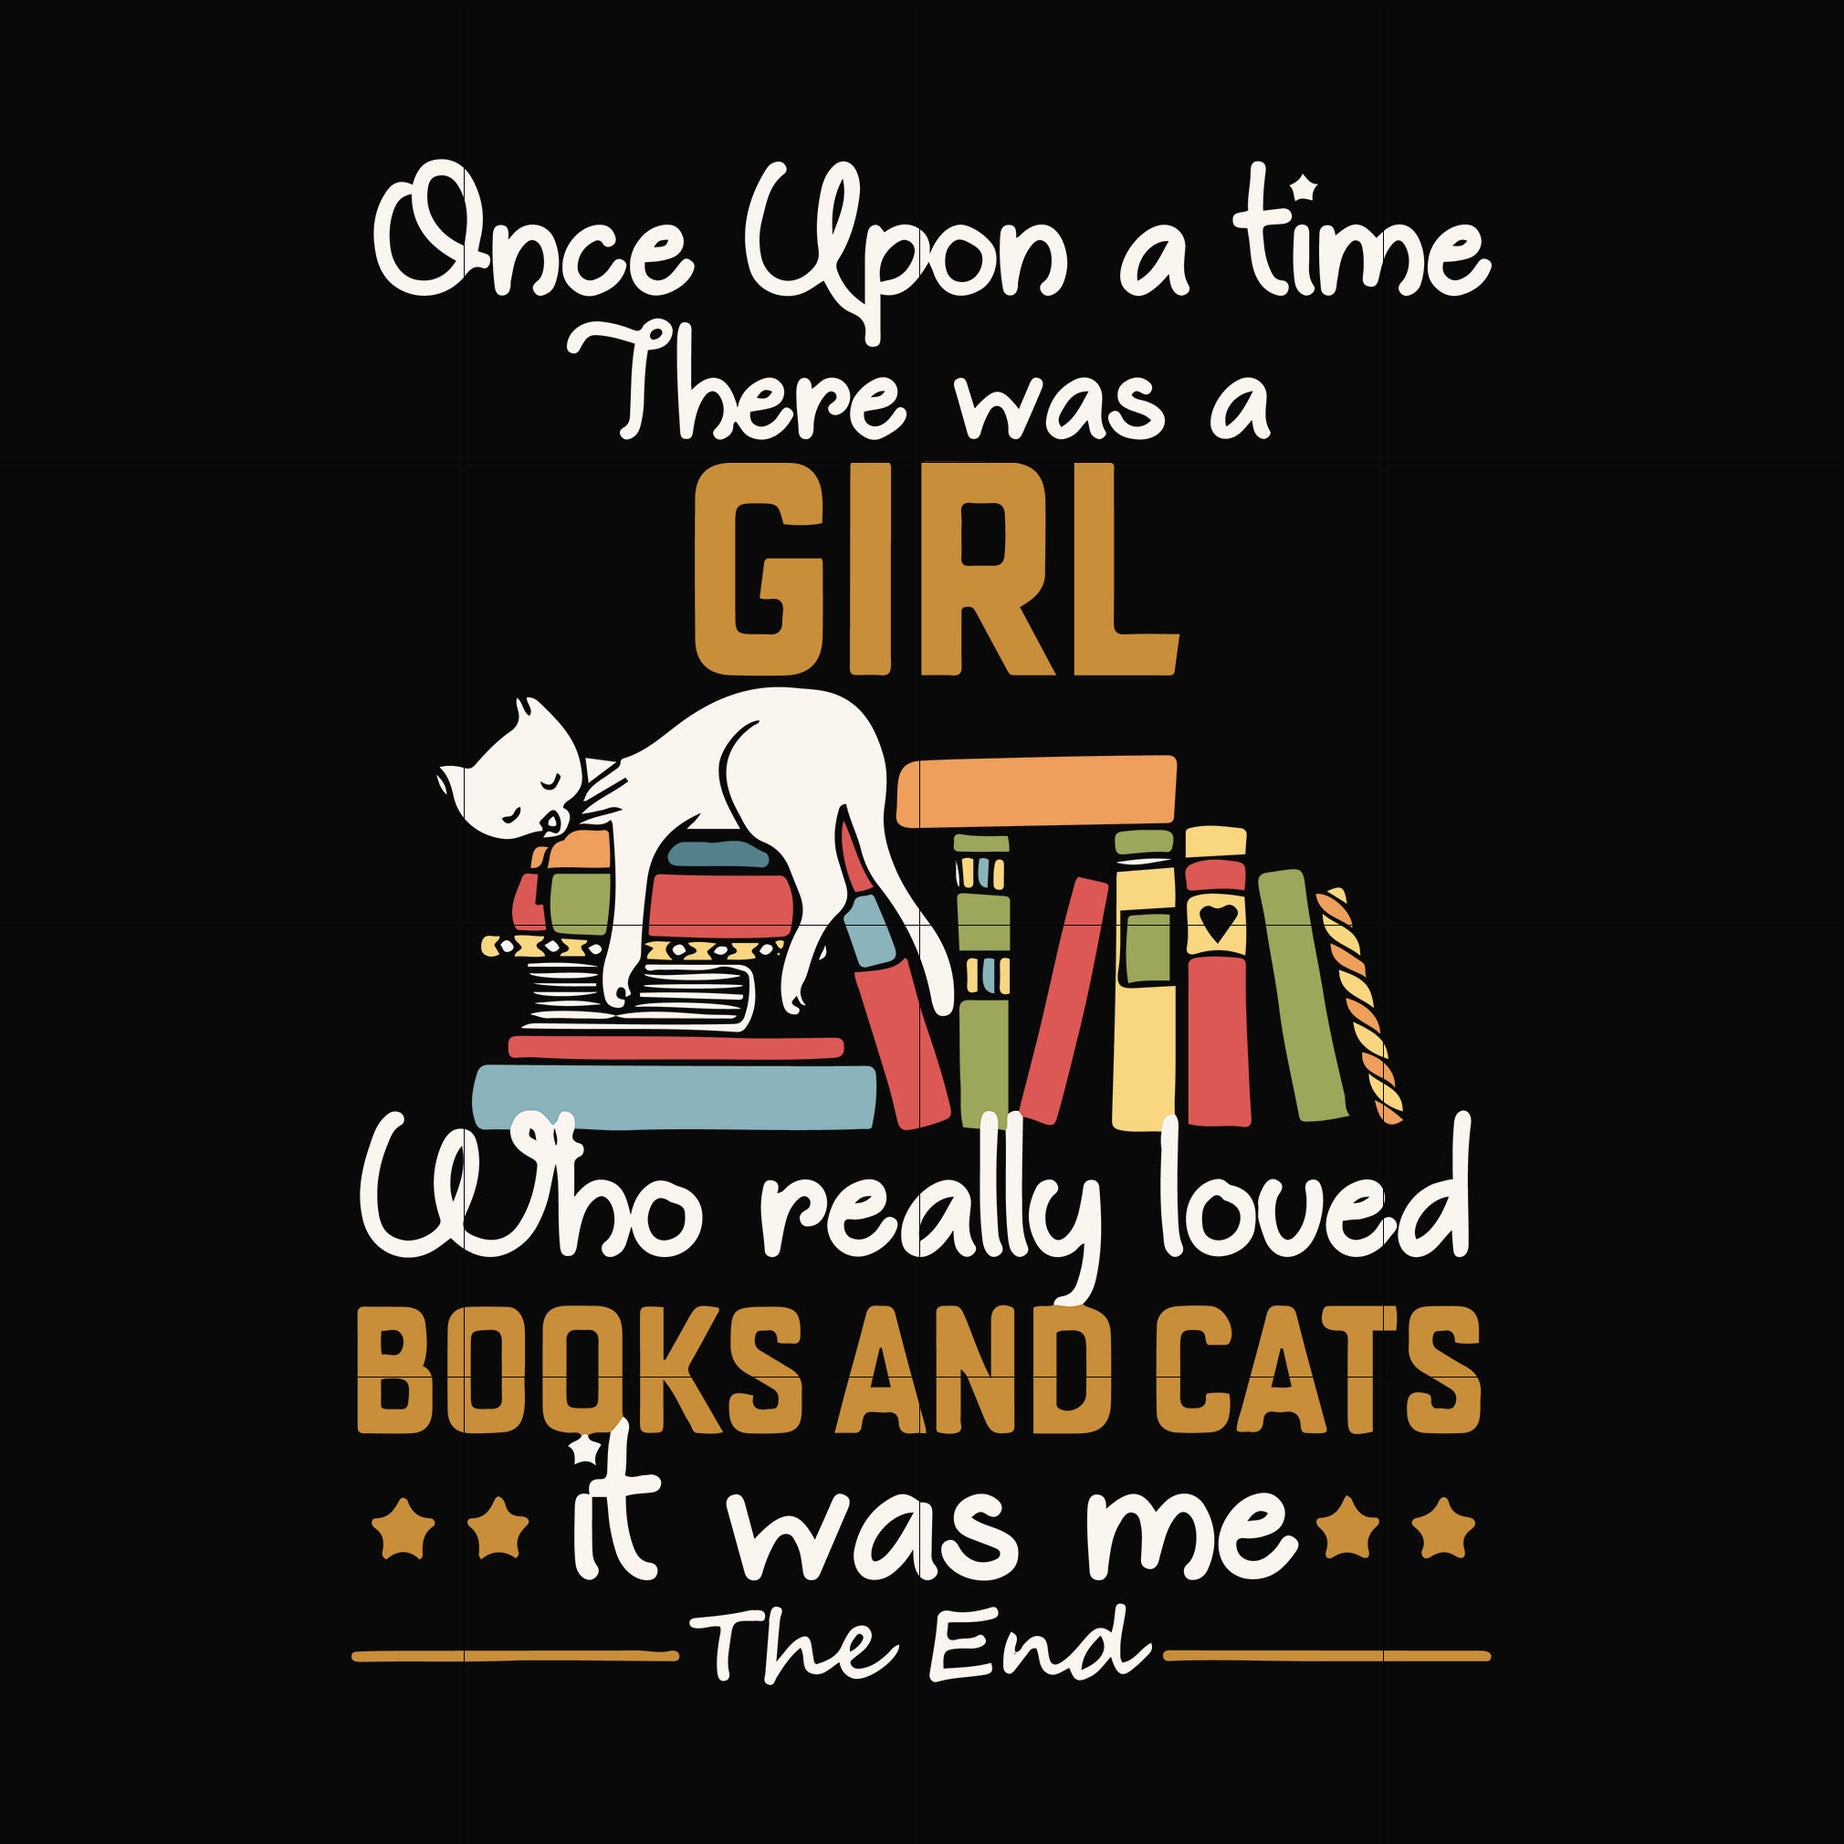 Once upon a time there was a girl who really loved books and cats it was me svg, png, dxf, eps digital file OTH0057